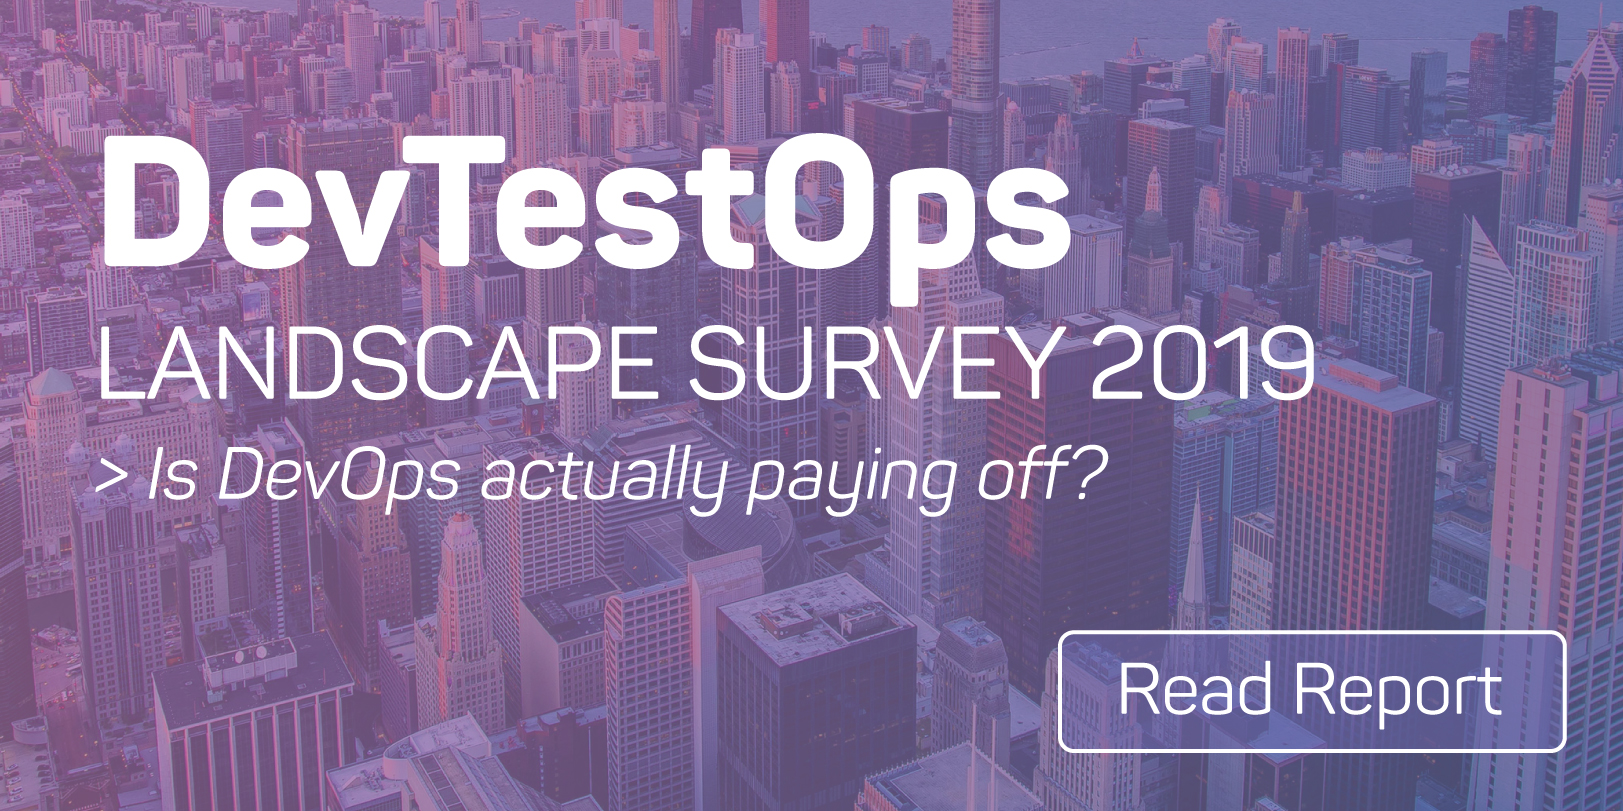 The words Dev Test Ops landscape survey 2019 Is Dev Ops actually paying off? Read report, over an image of skyscrapers.